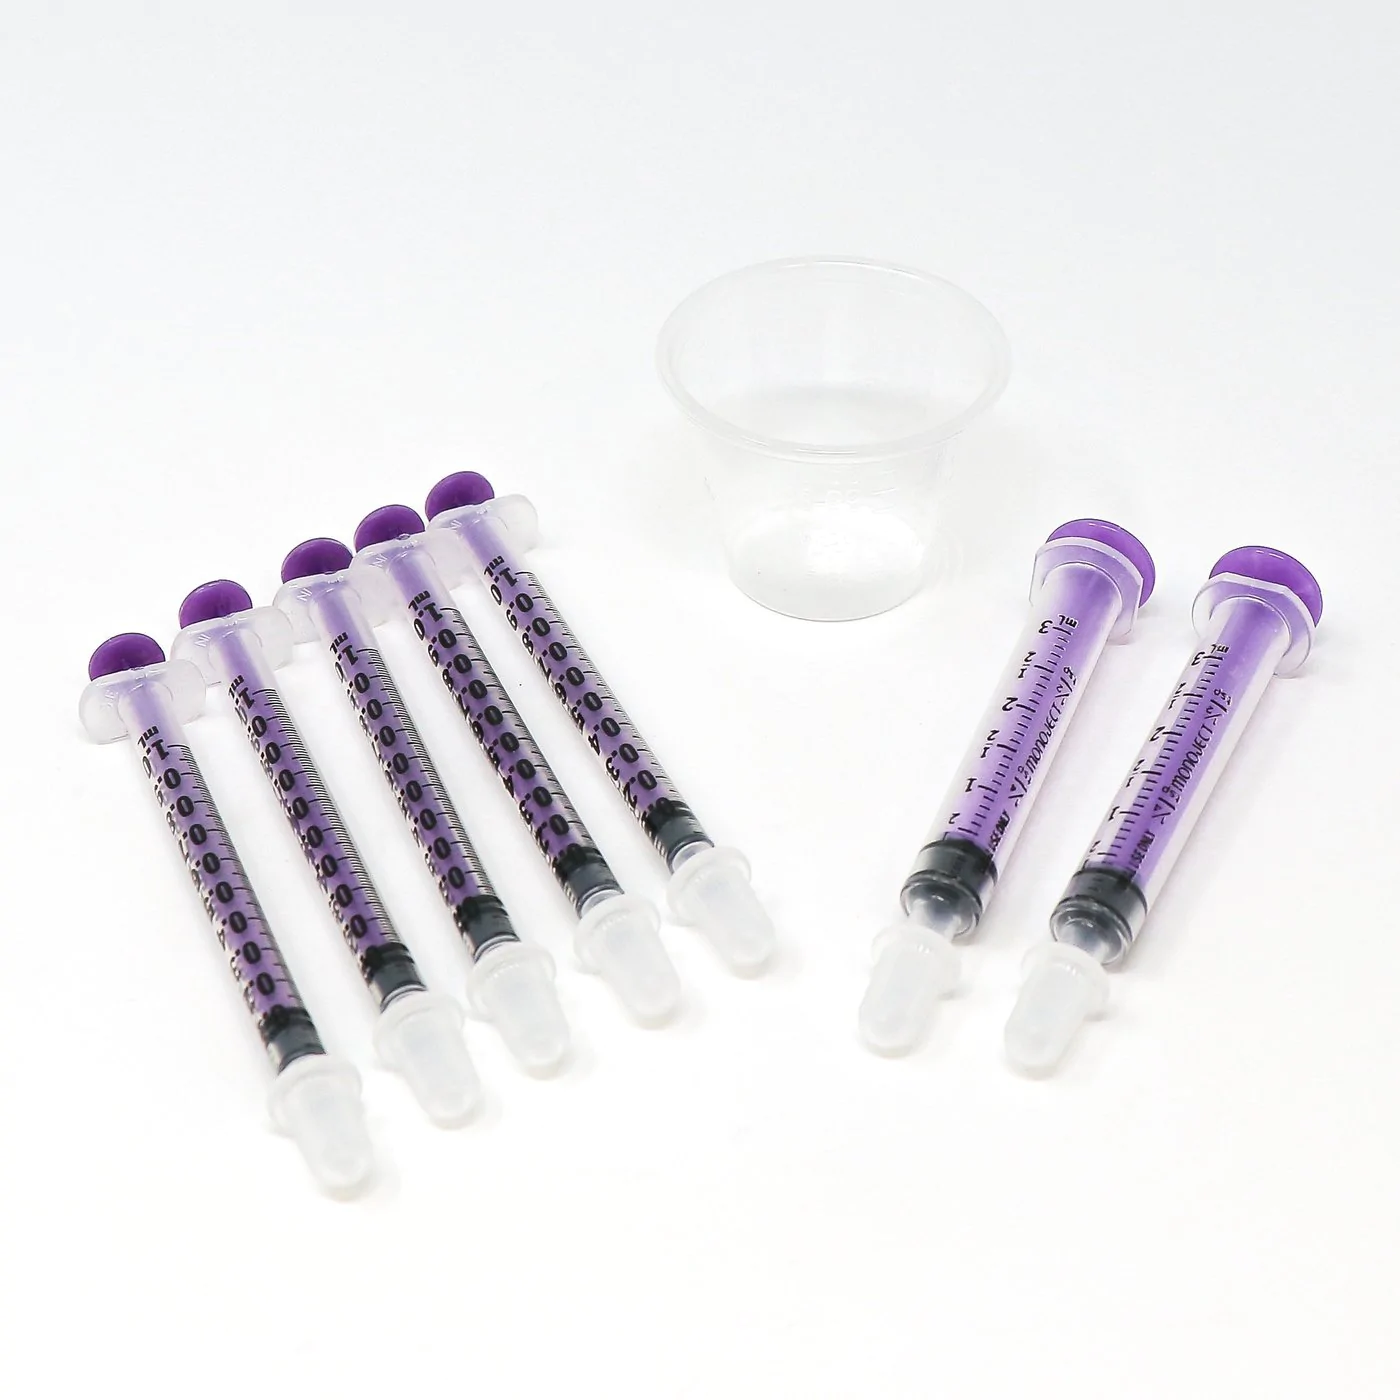 Colostrum Collection Kit